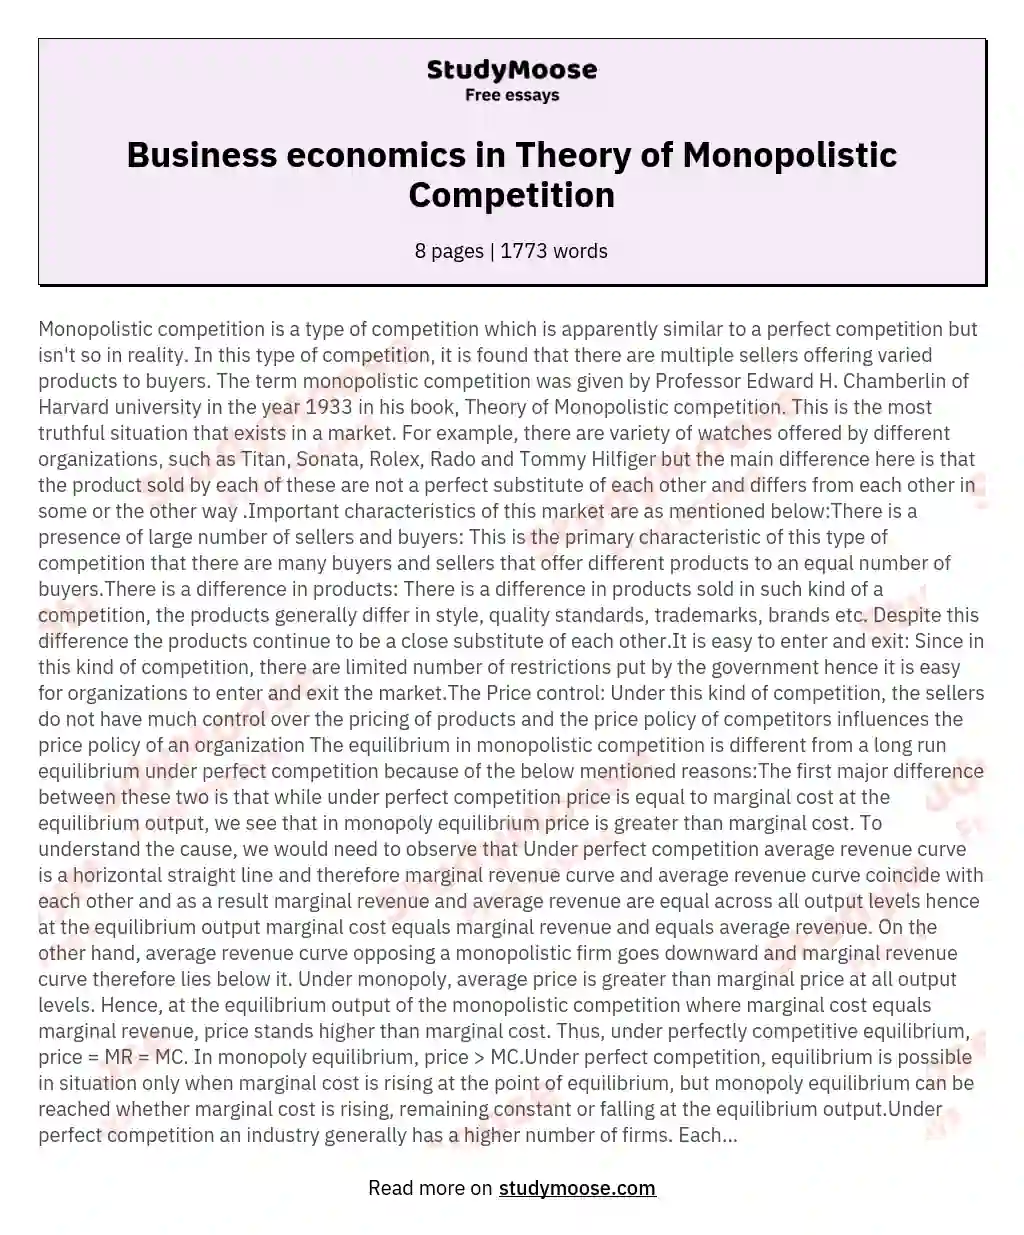 Business economics in Theory of Monopolistic Competition essay